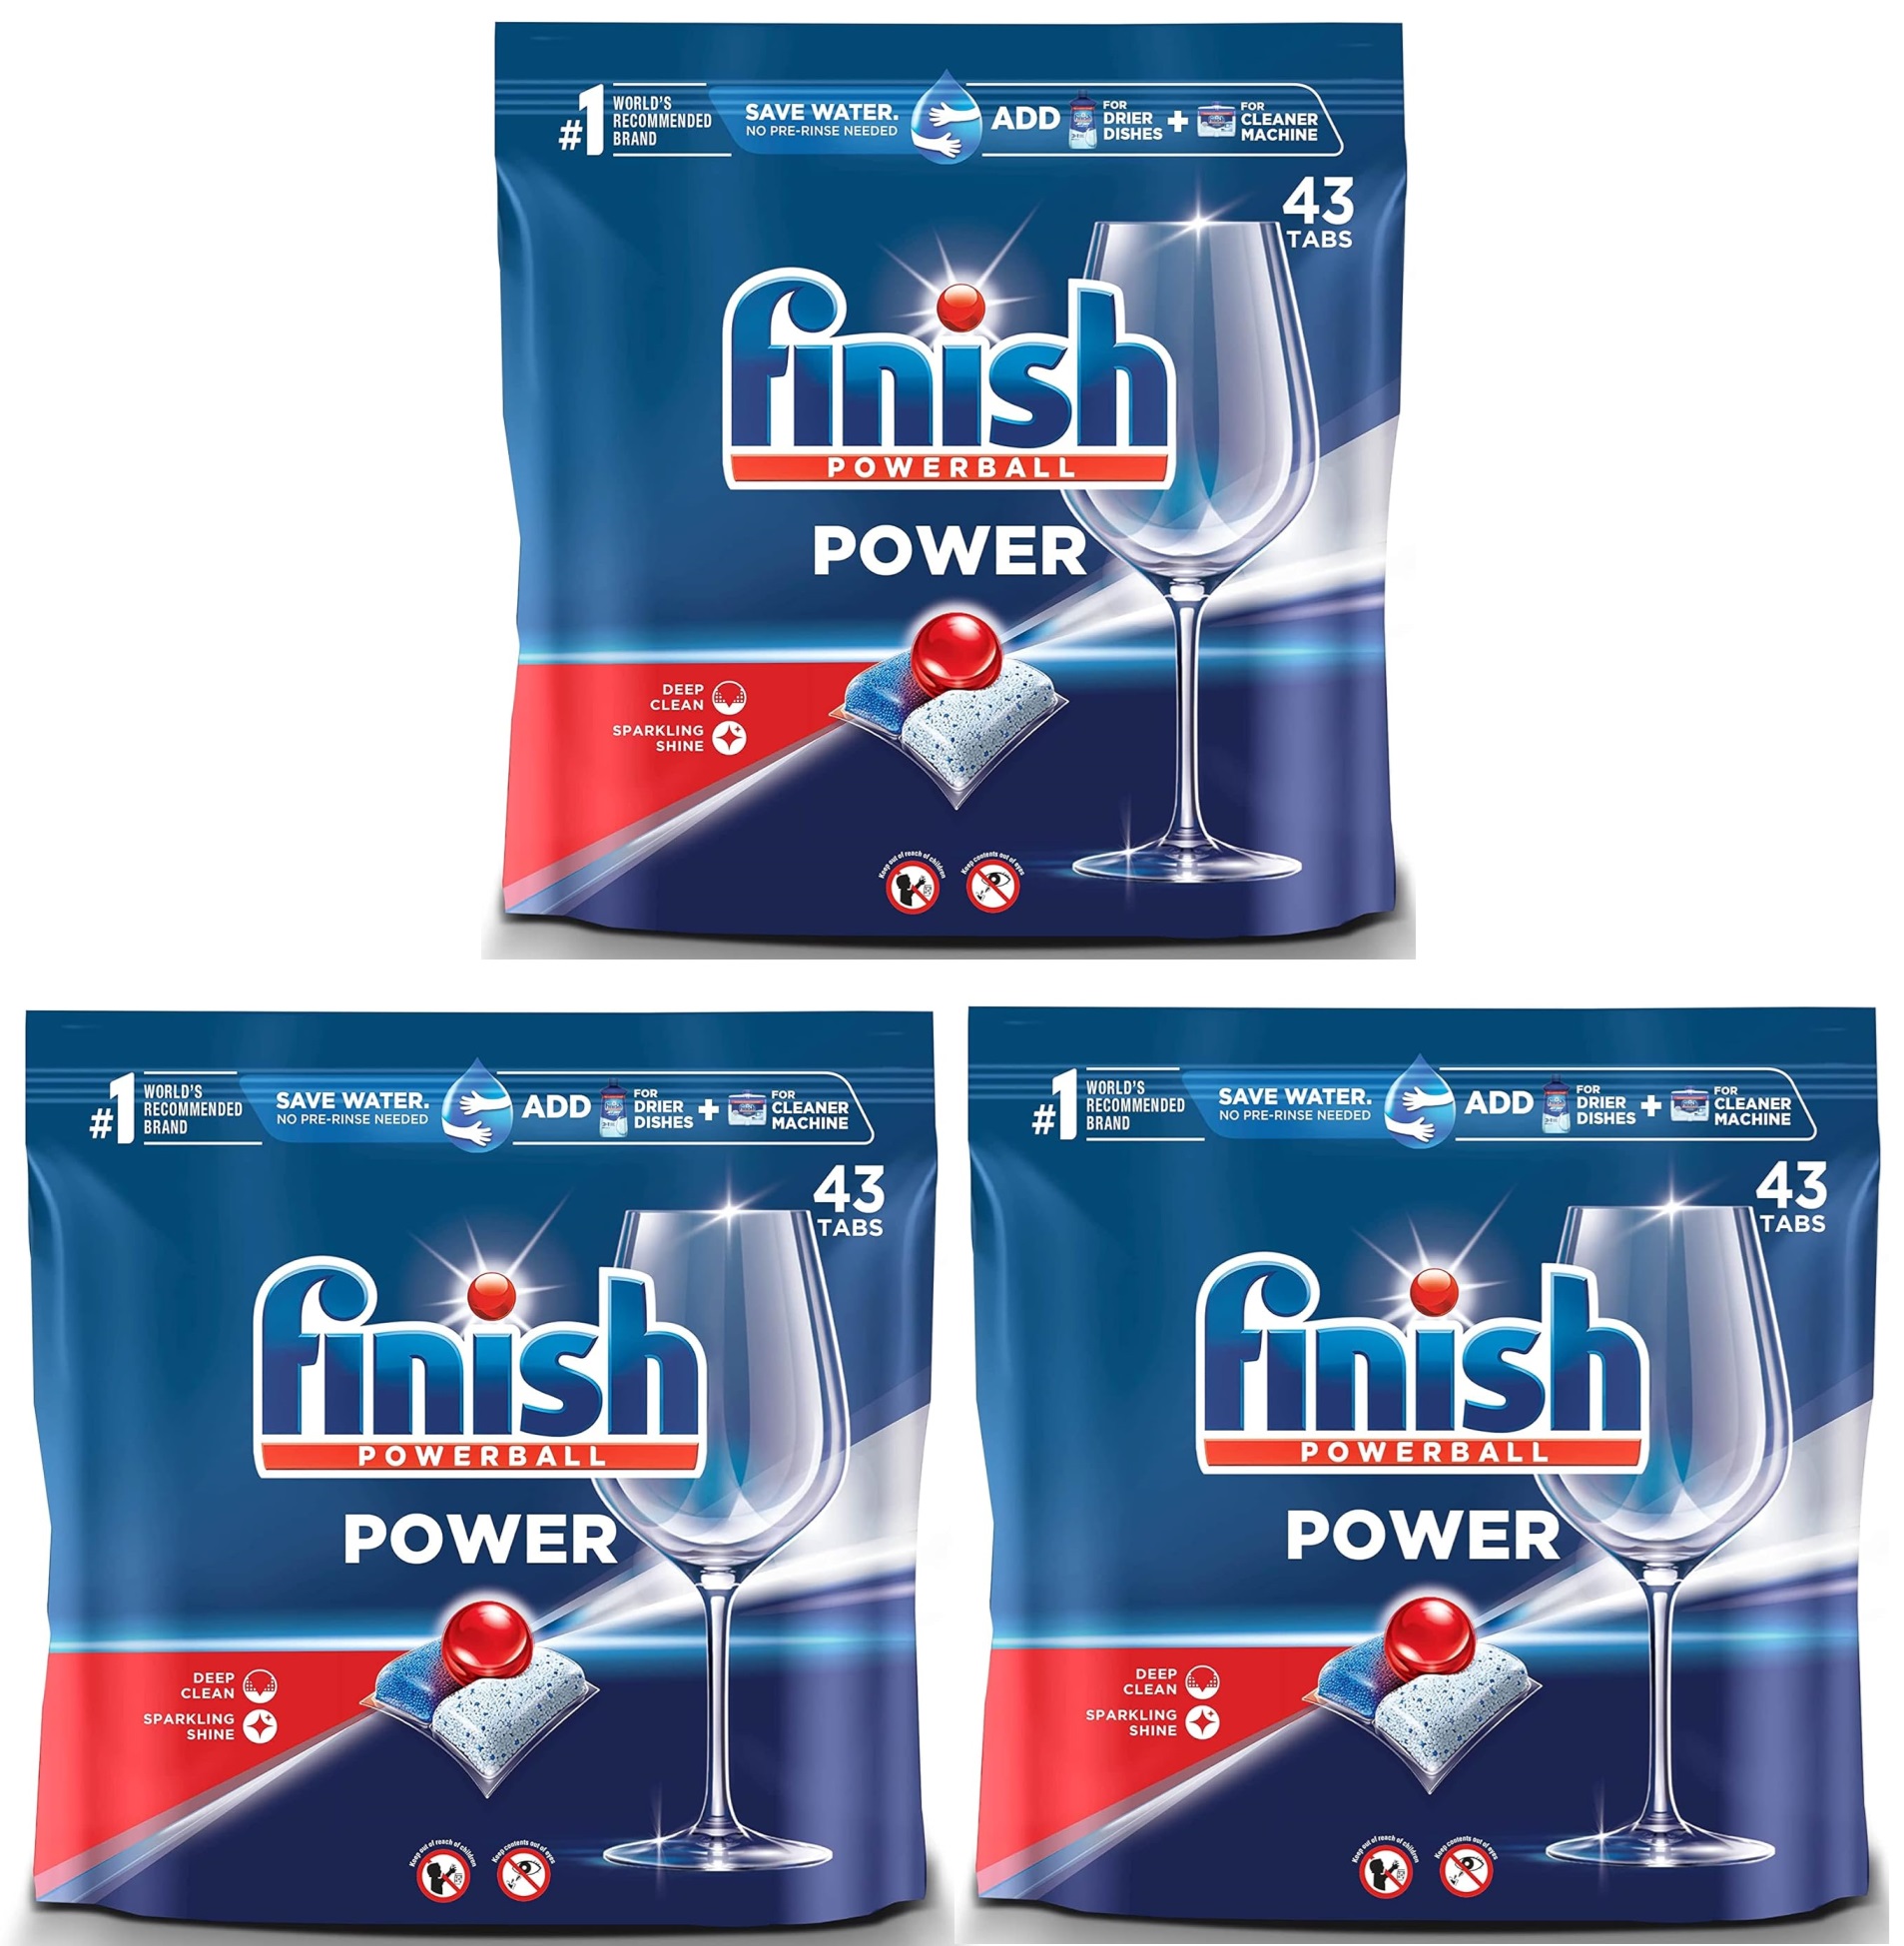 Price Drop** Select Household Supplies: Buy 3, Get $10 Off: 23-Oz Finish  Jet-Dry Rinse Aid 3 for $13.50 ($4.50 each) w/ S&S + Free Shipping w/ Prime  or on $35+